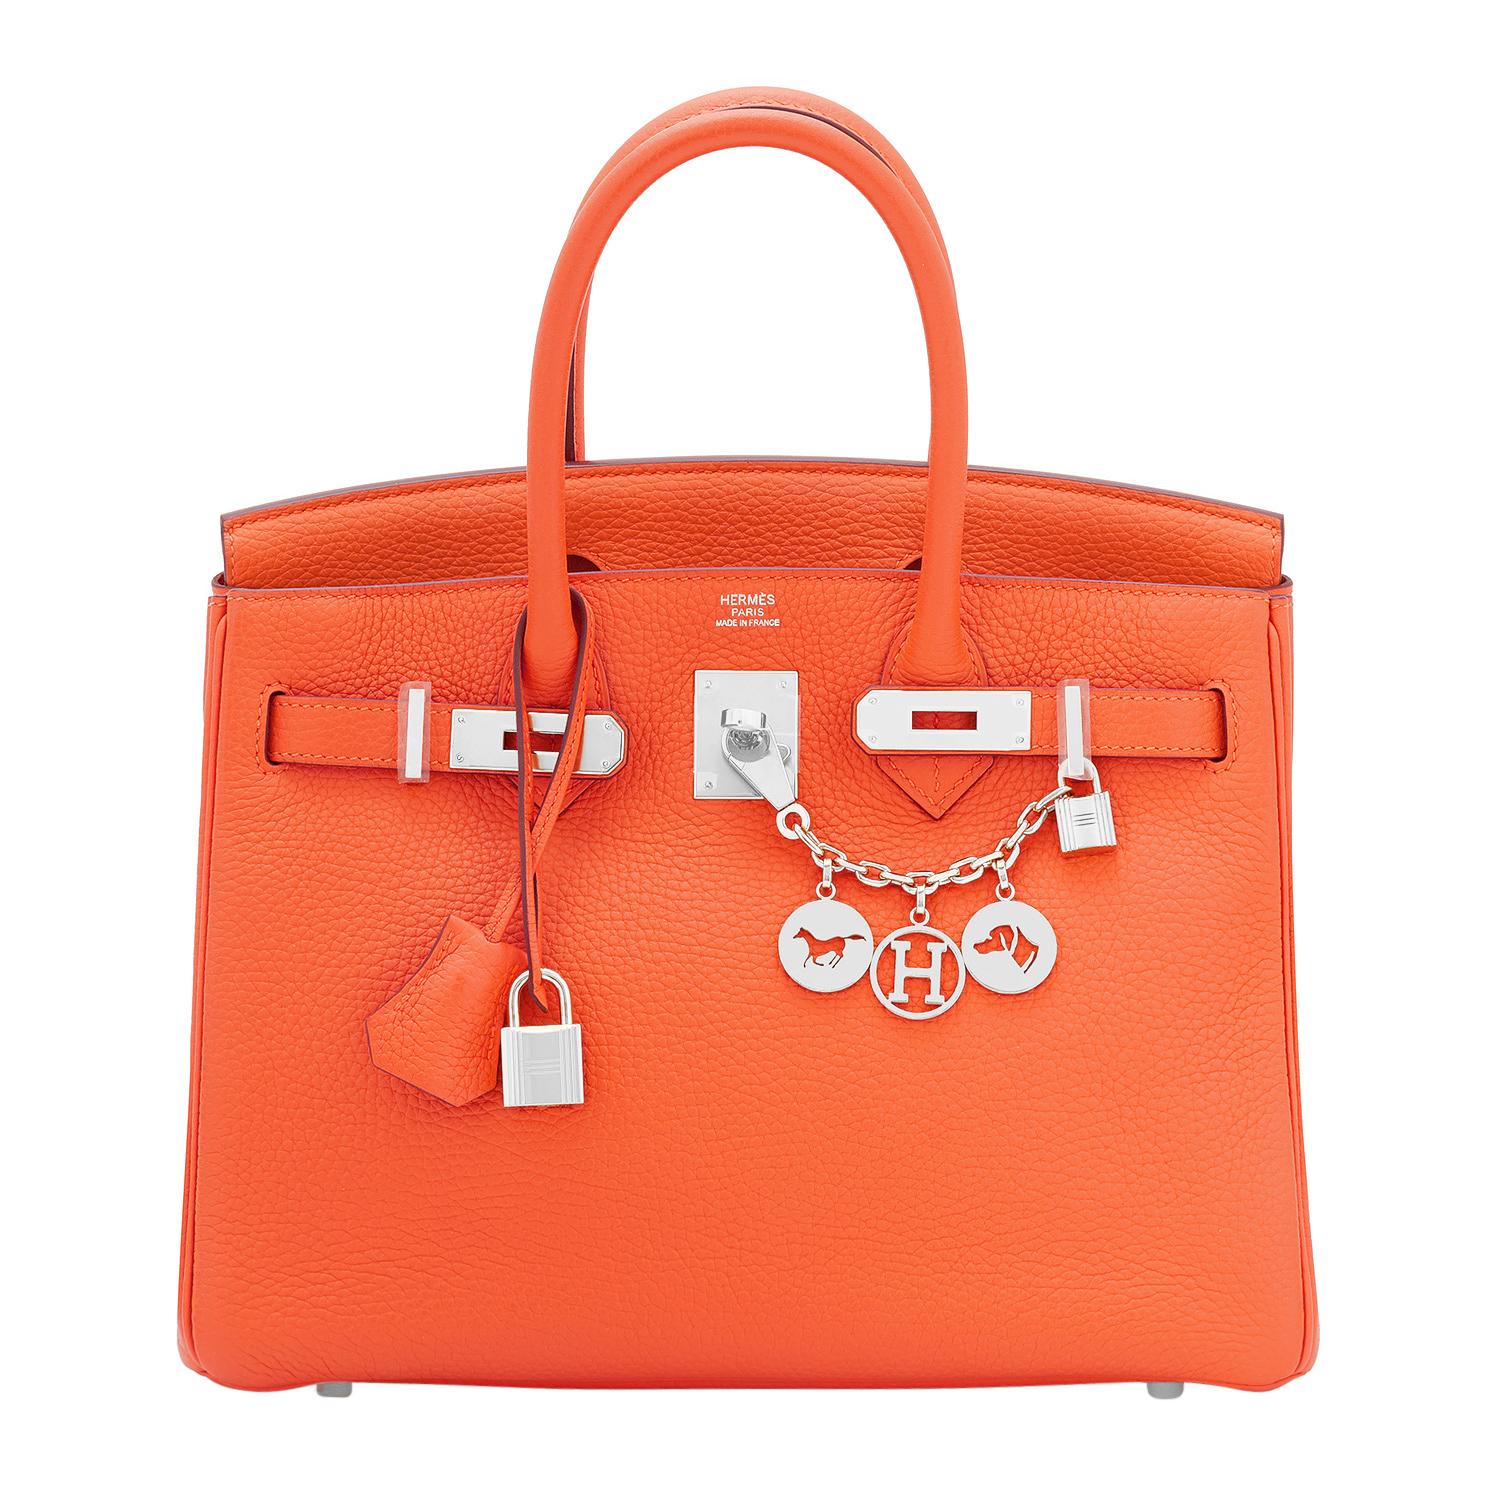 Hermes Birkin 30 Feu Orange Birkin Bag U Stamp, 2022
Spectacularly gorgeous Feu Orange is very coveted and rare to find now.
Just purchased from Hermes store; bag bears new interior 2022 U Stamp.
Brand New in Box. Store fresh. Pristine condition